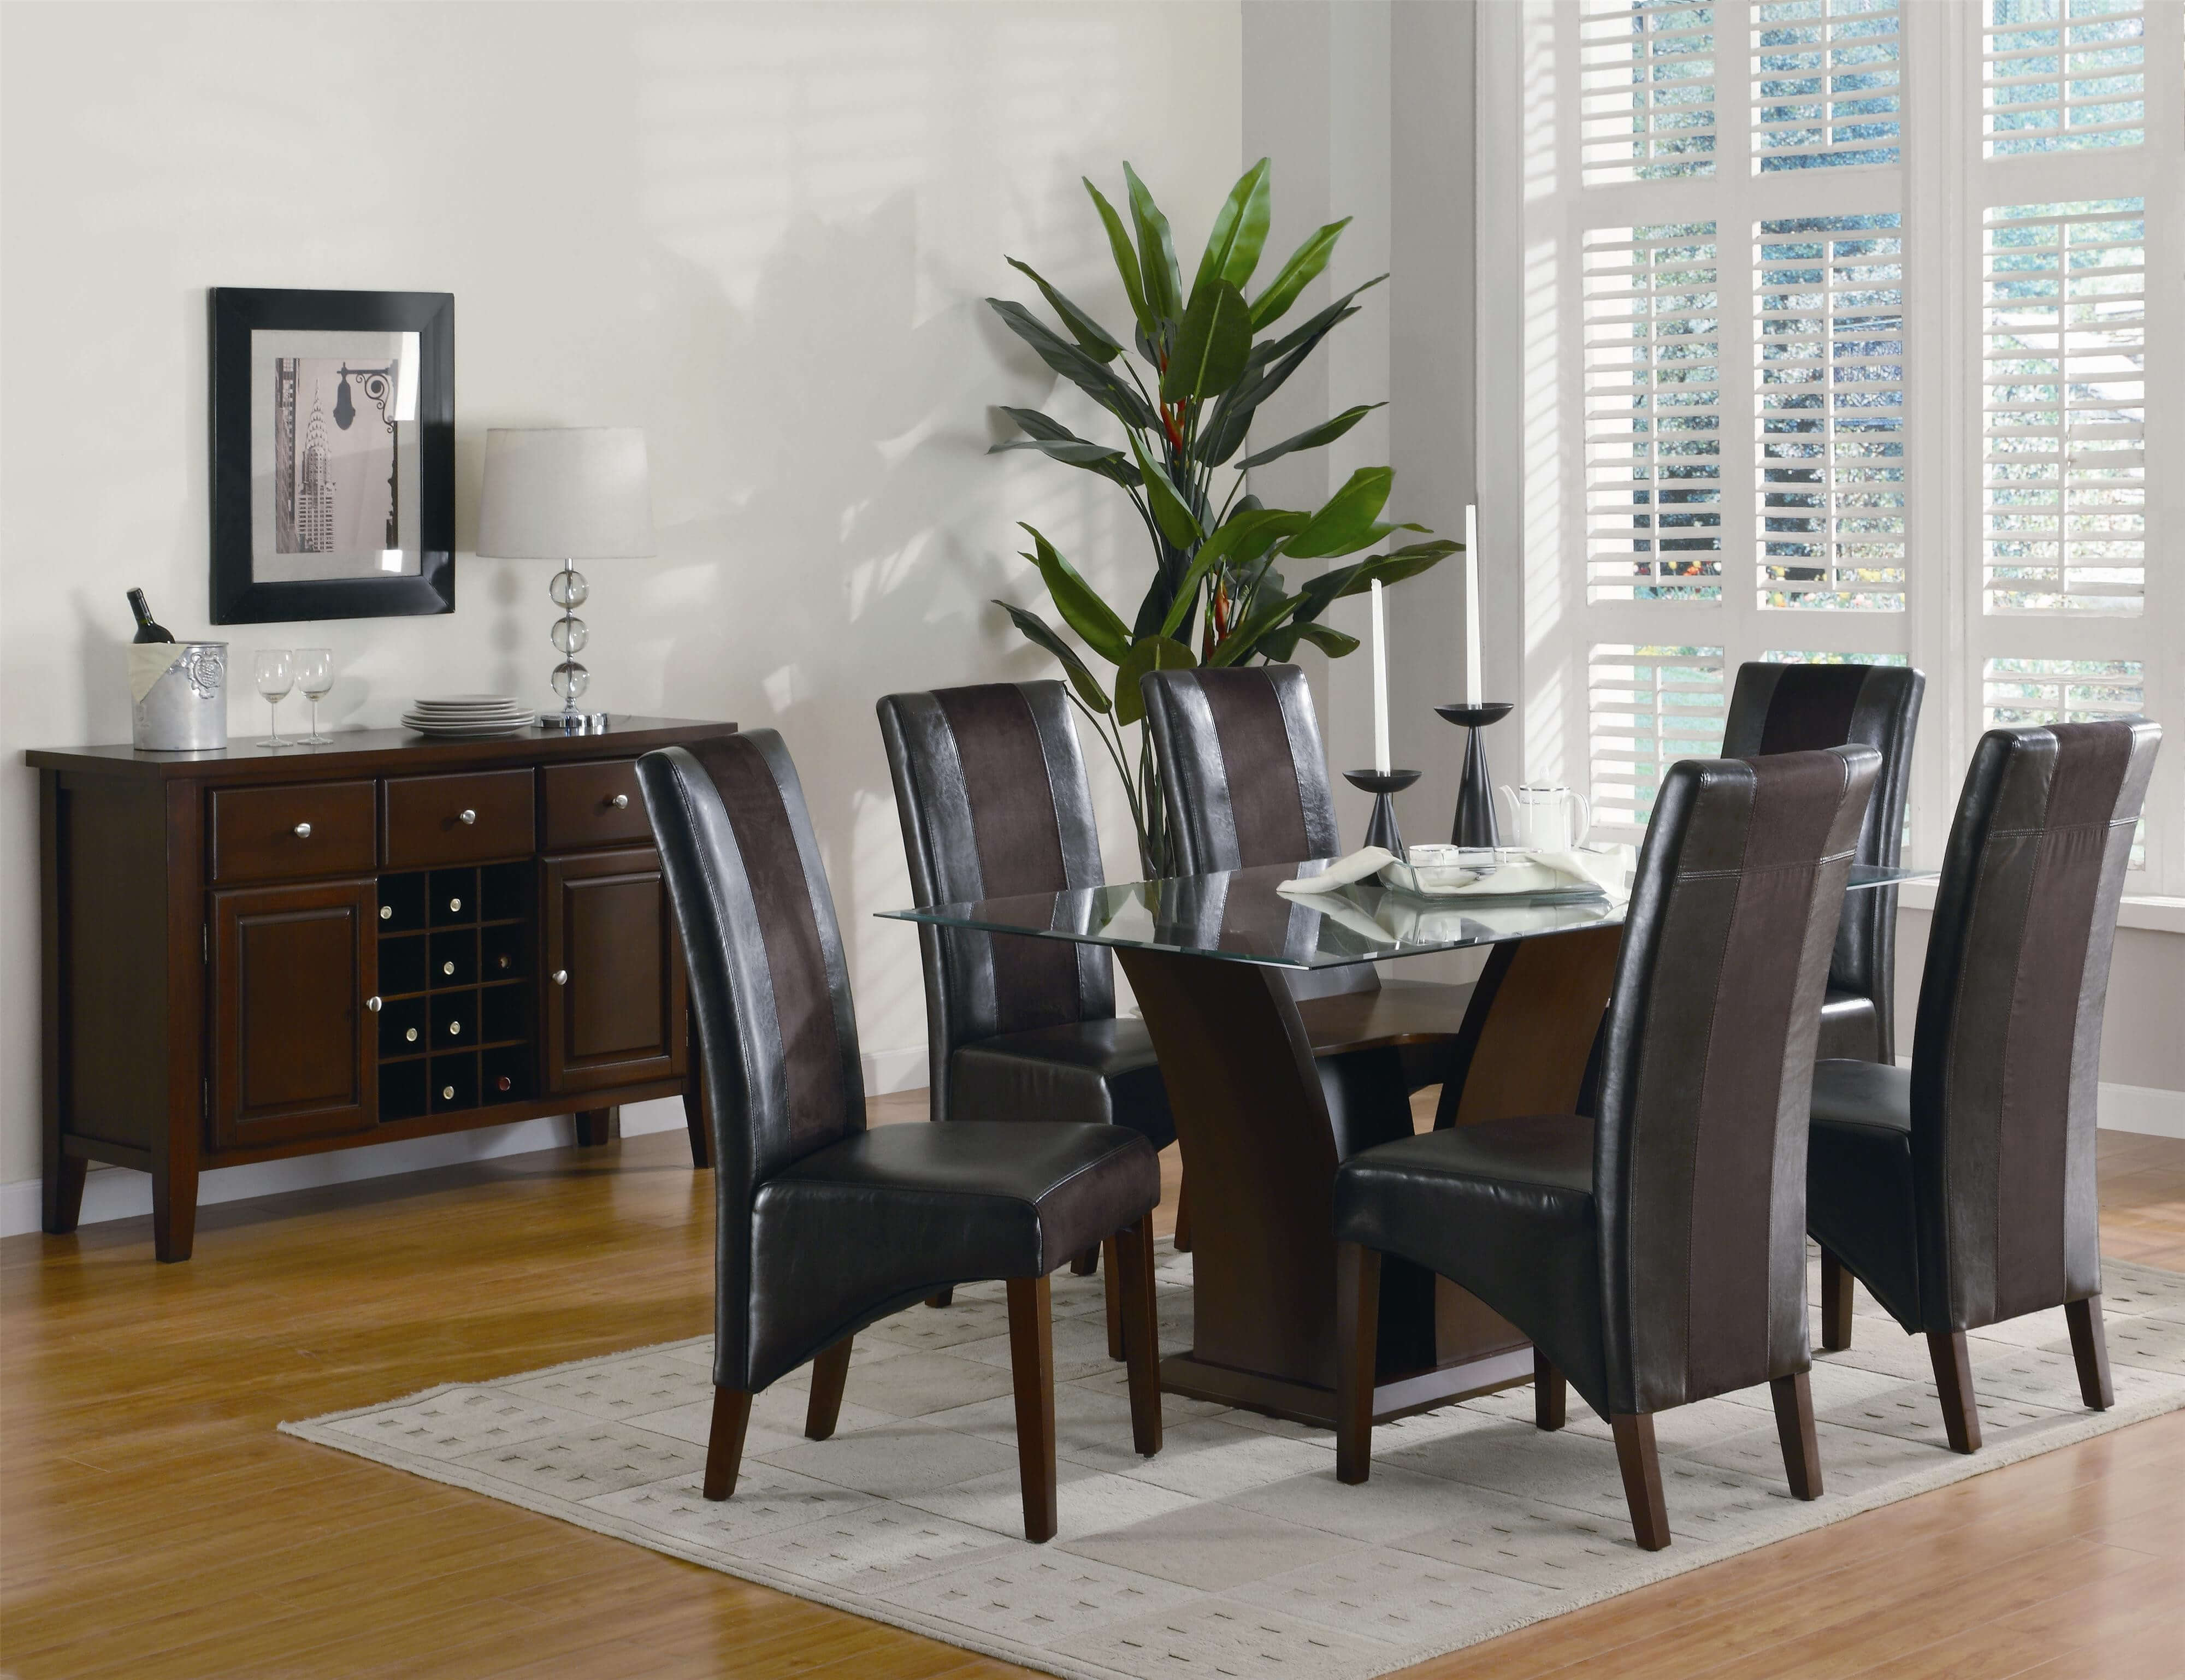 Top 18 King Size Dining Room Sets That You Have Hardly Seen